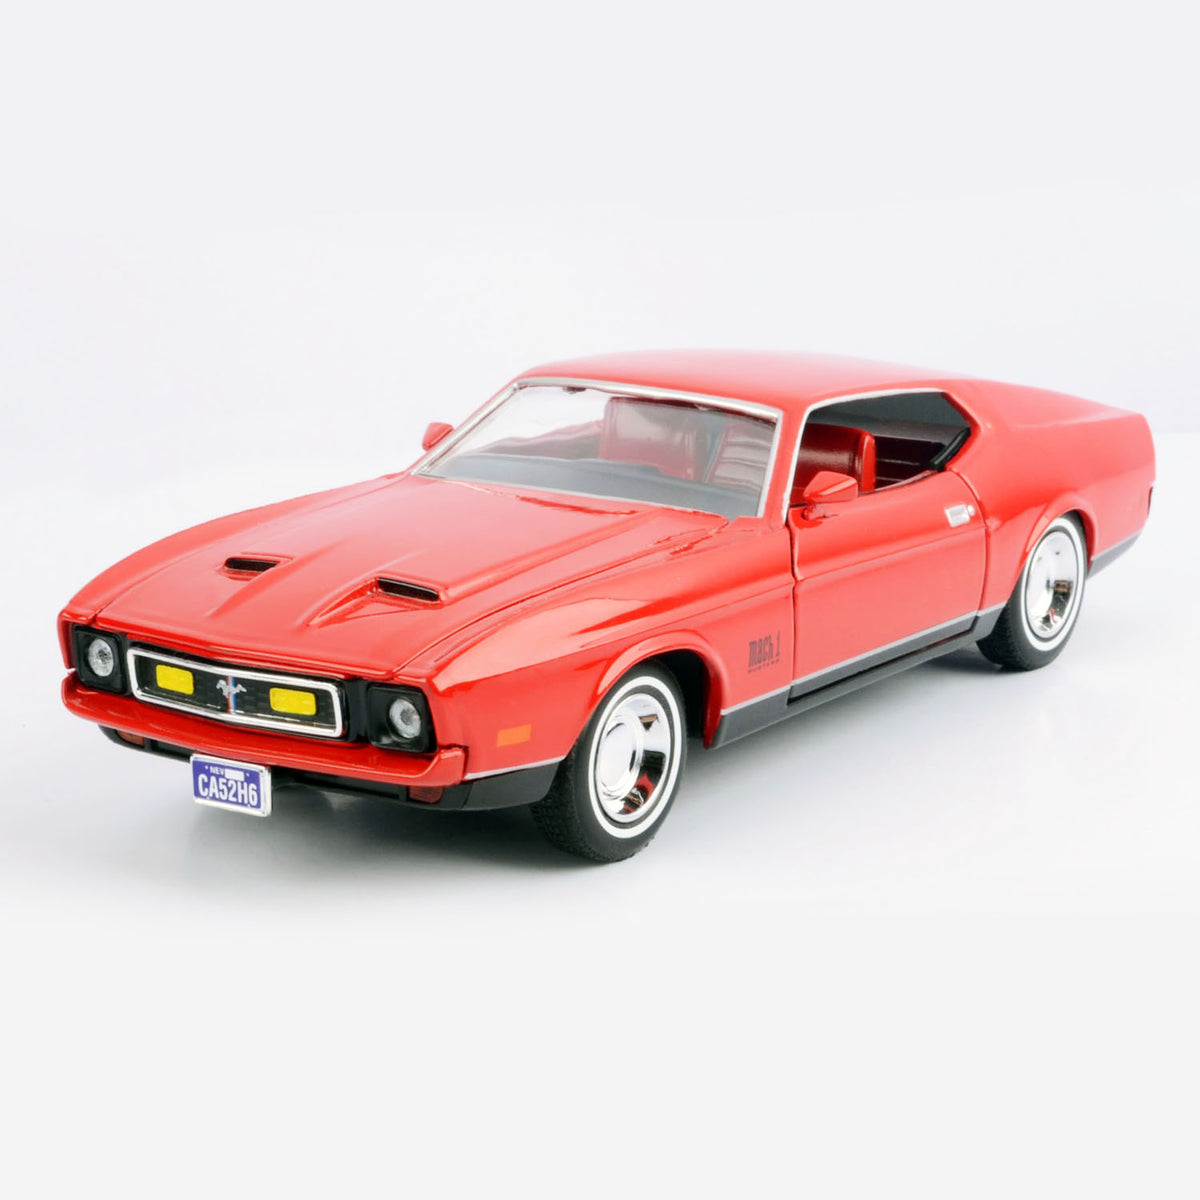 James Bond Ford Mustang Model Car - Diamonds Are Forever Edition - By Motormax